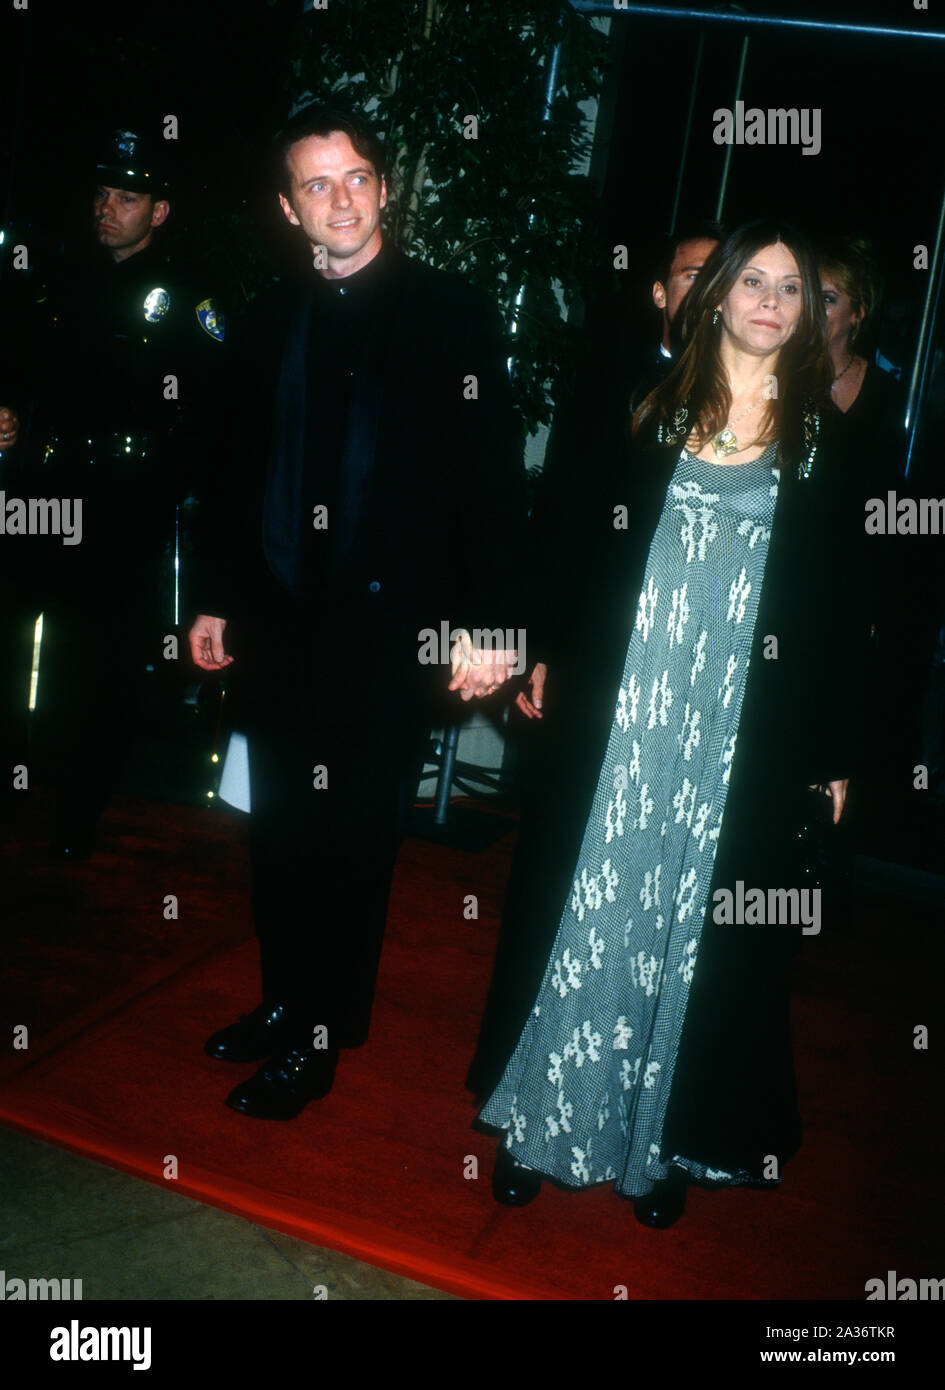 Beverly Hills, California, USA 21st January 1995 Actor Aidan Quinn and wife actress Elizabeth Bracco attend the 52nd Annual Golden Globe Awards on January 21, 1995 at the Beverly Hilton Hotel in Beverly Hills, California, USA. Photo by Barry King/Alamy Stock Photo Stock Photo